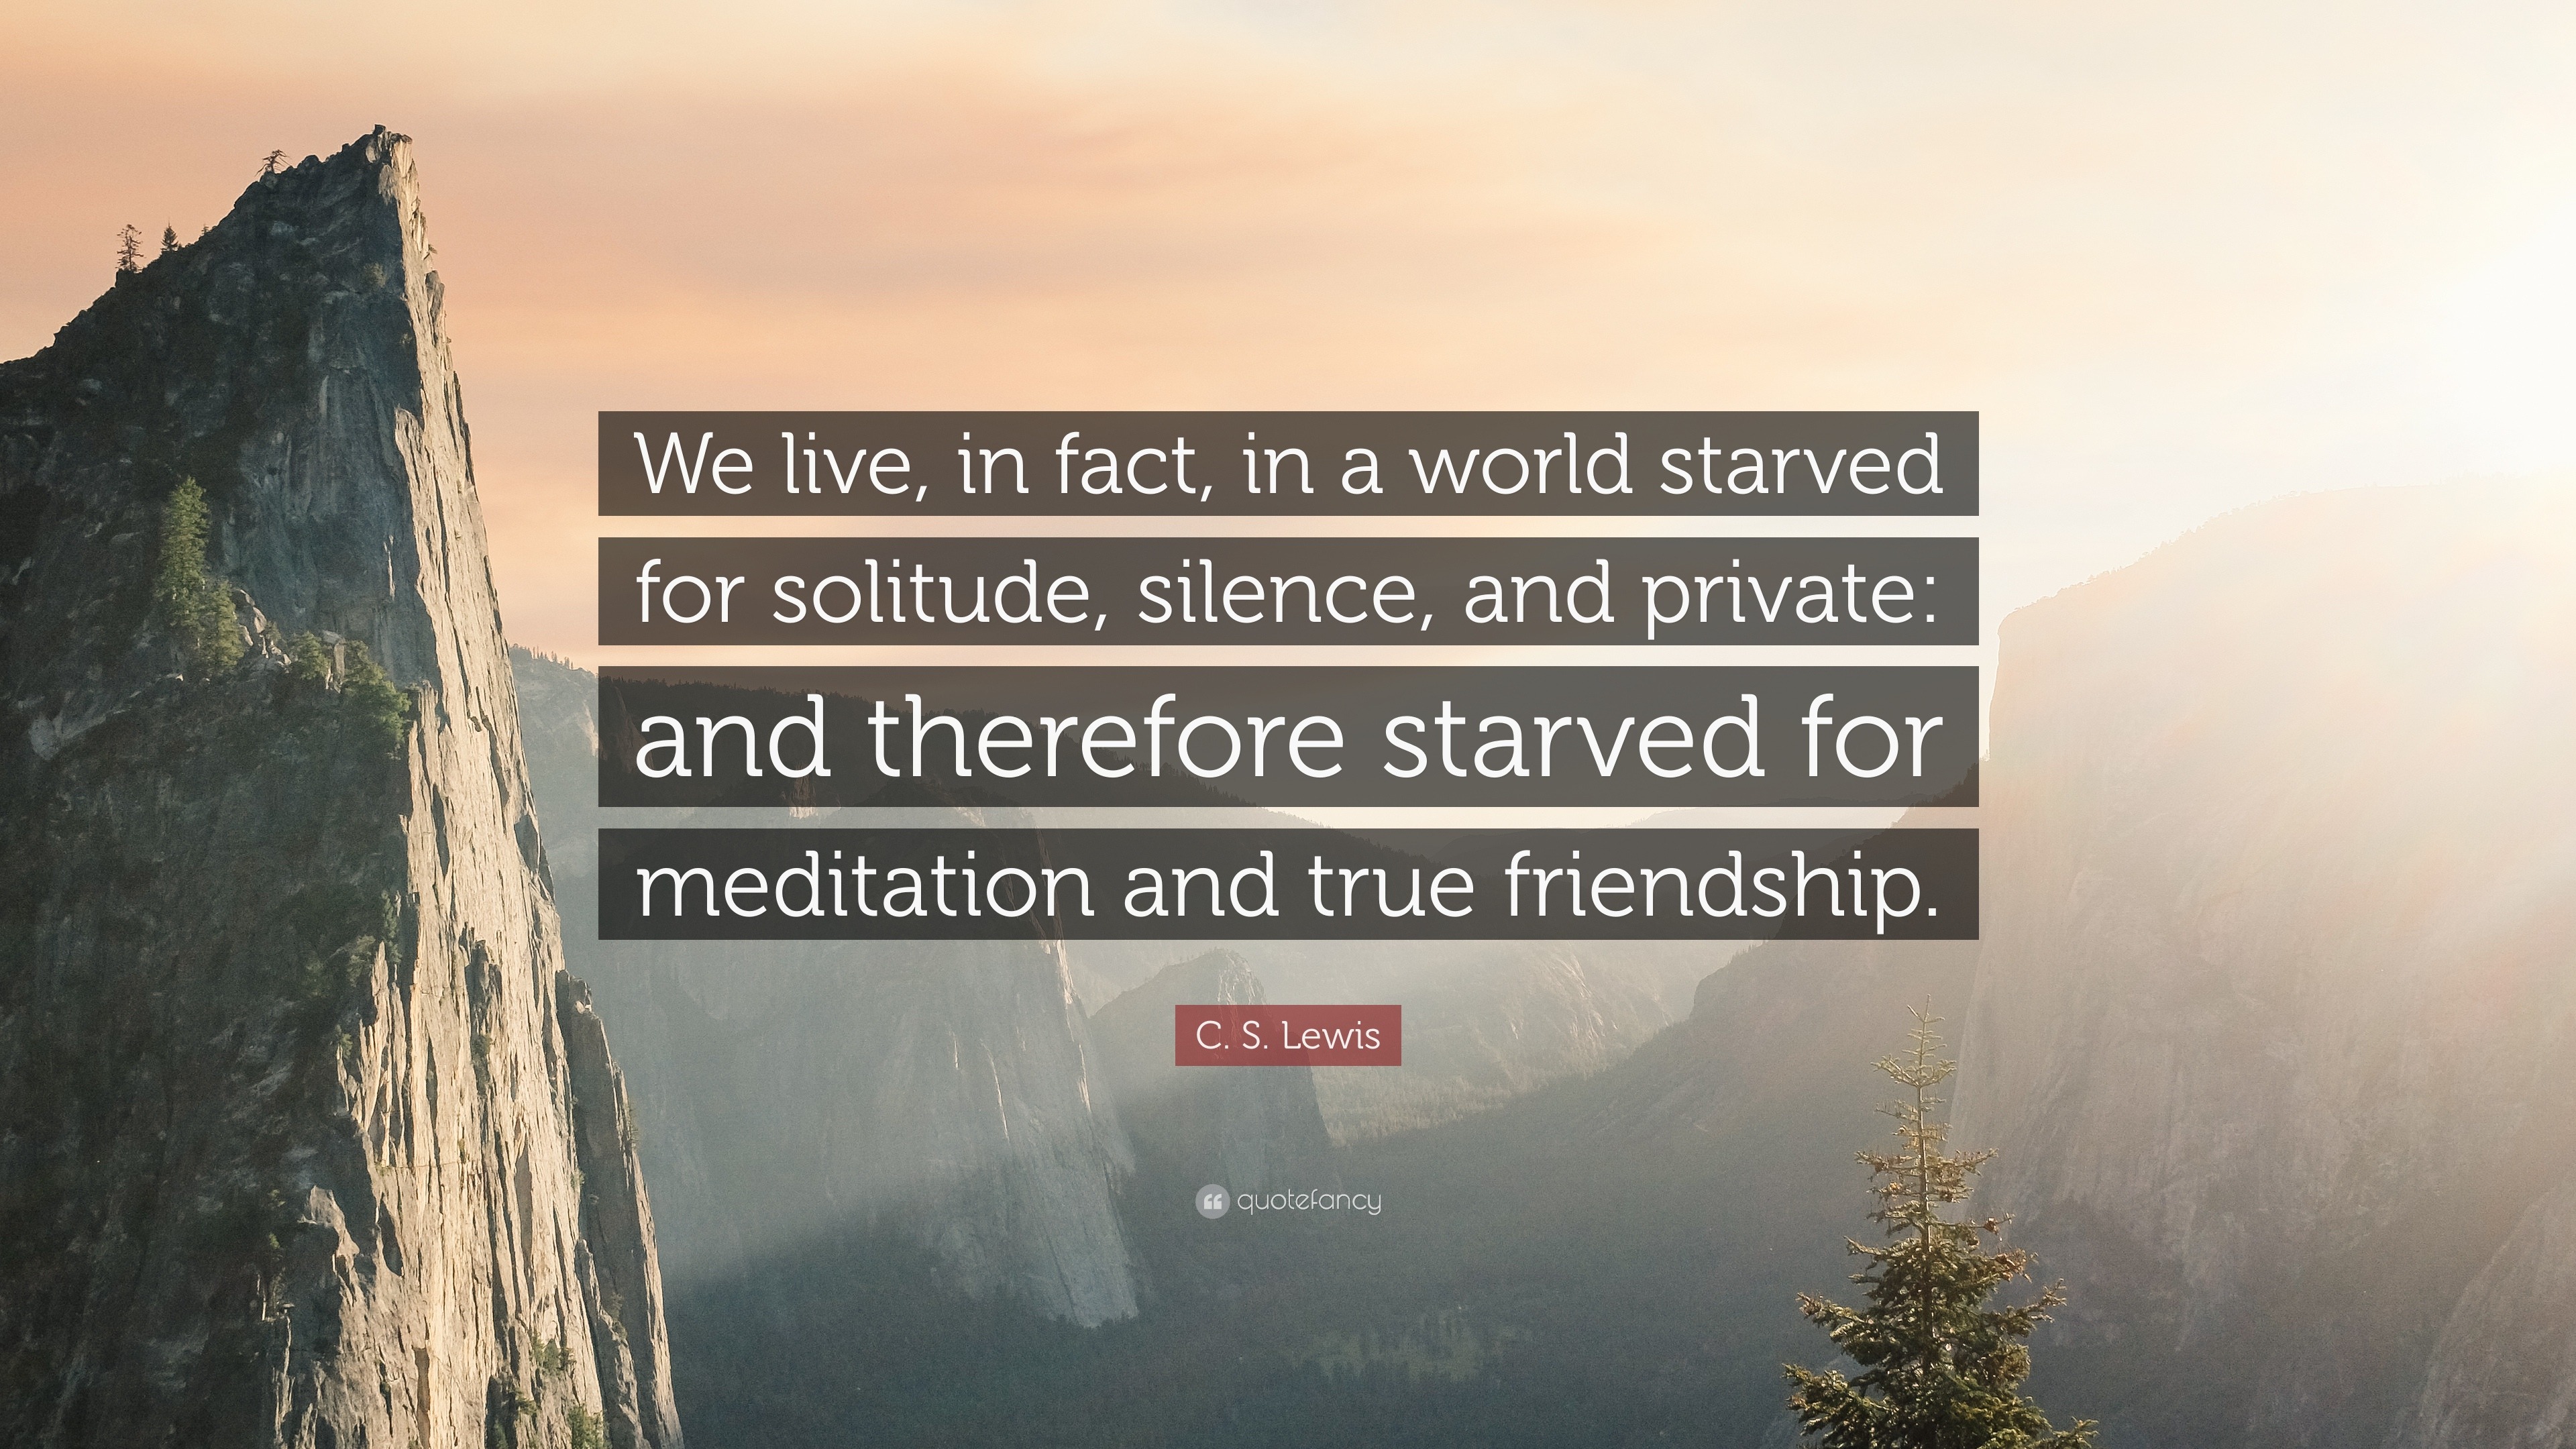 C S Lewis Quote We Live In Fact In A World Starved For Solitude Silence And Private And Therefore Starved For Meditation And True F 10 Wallpapers Quotefancy